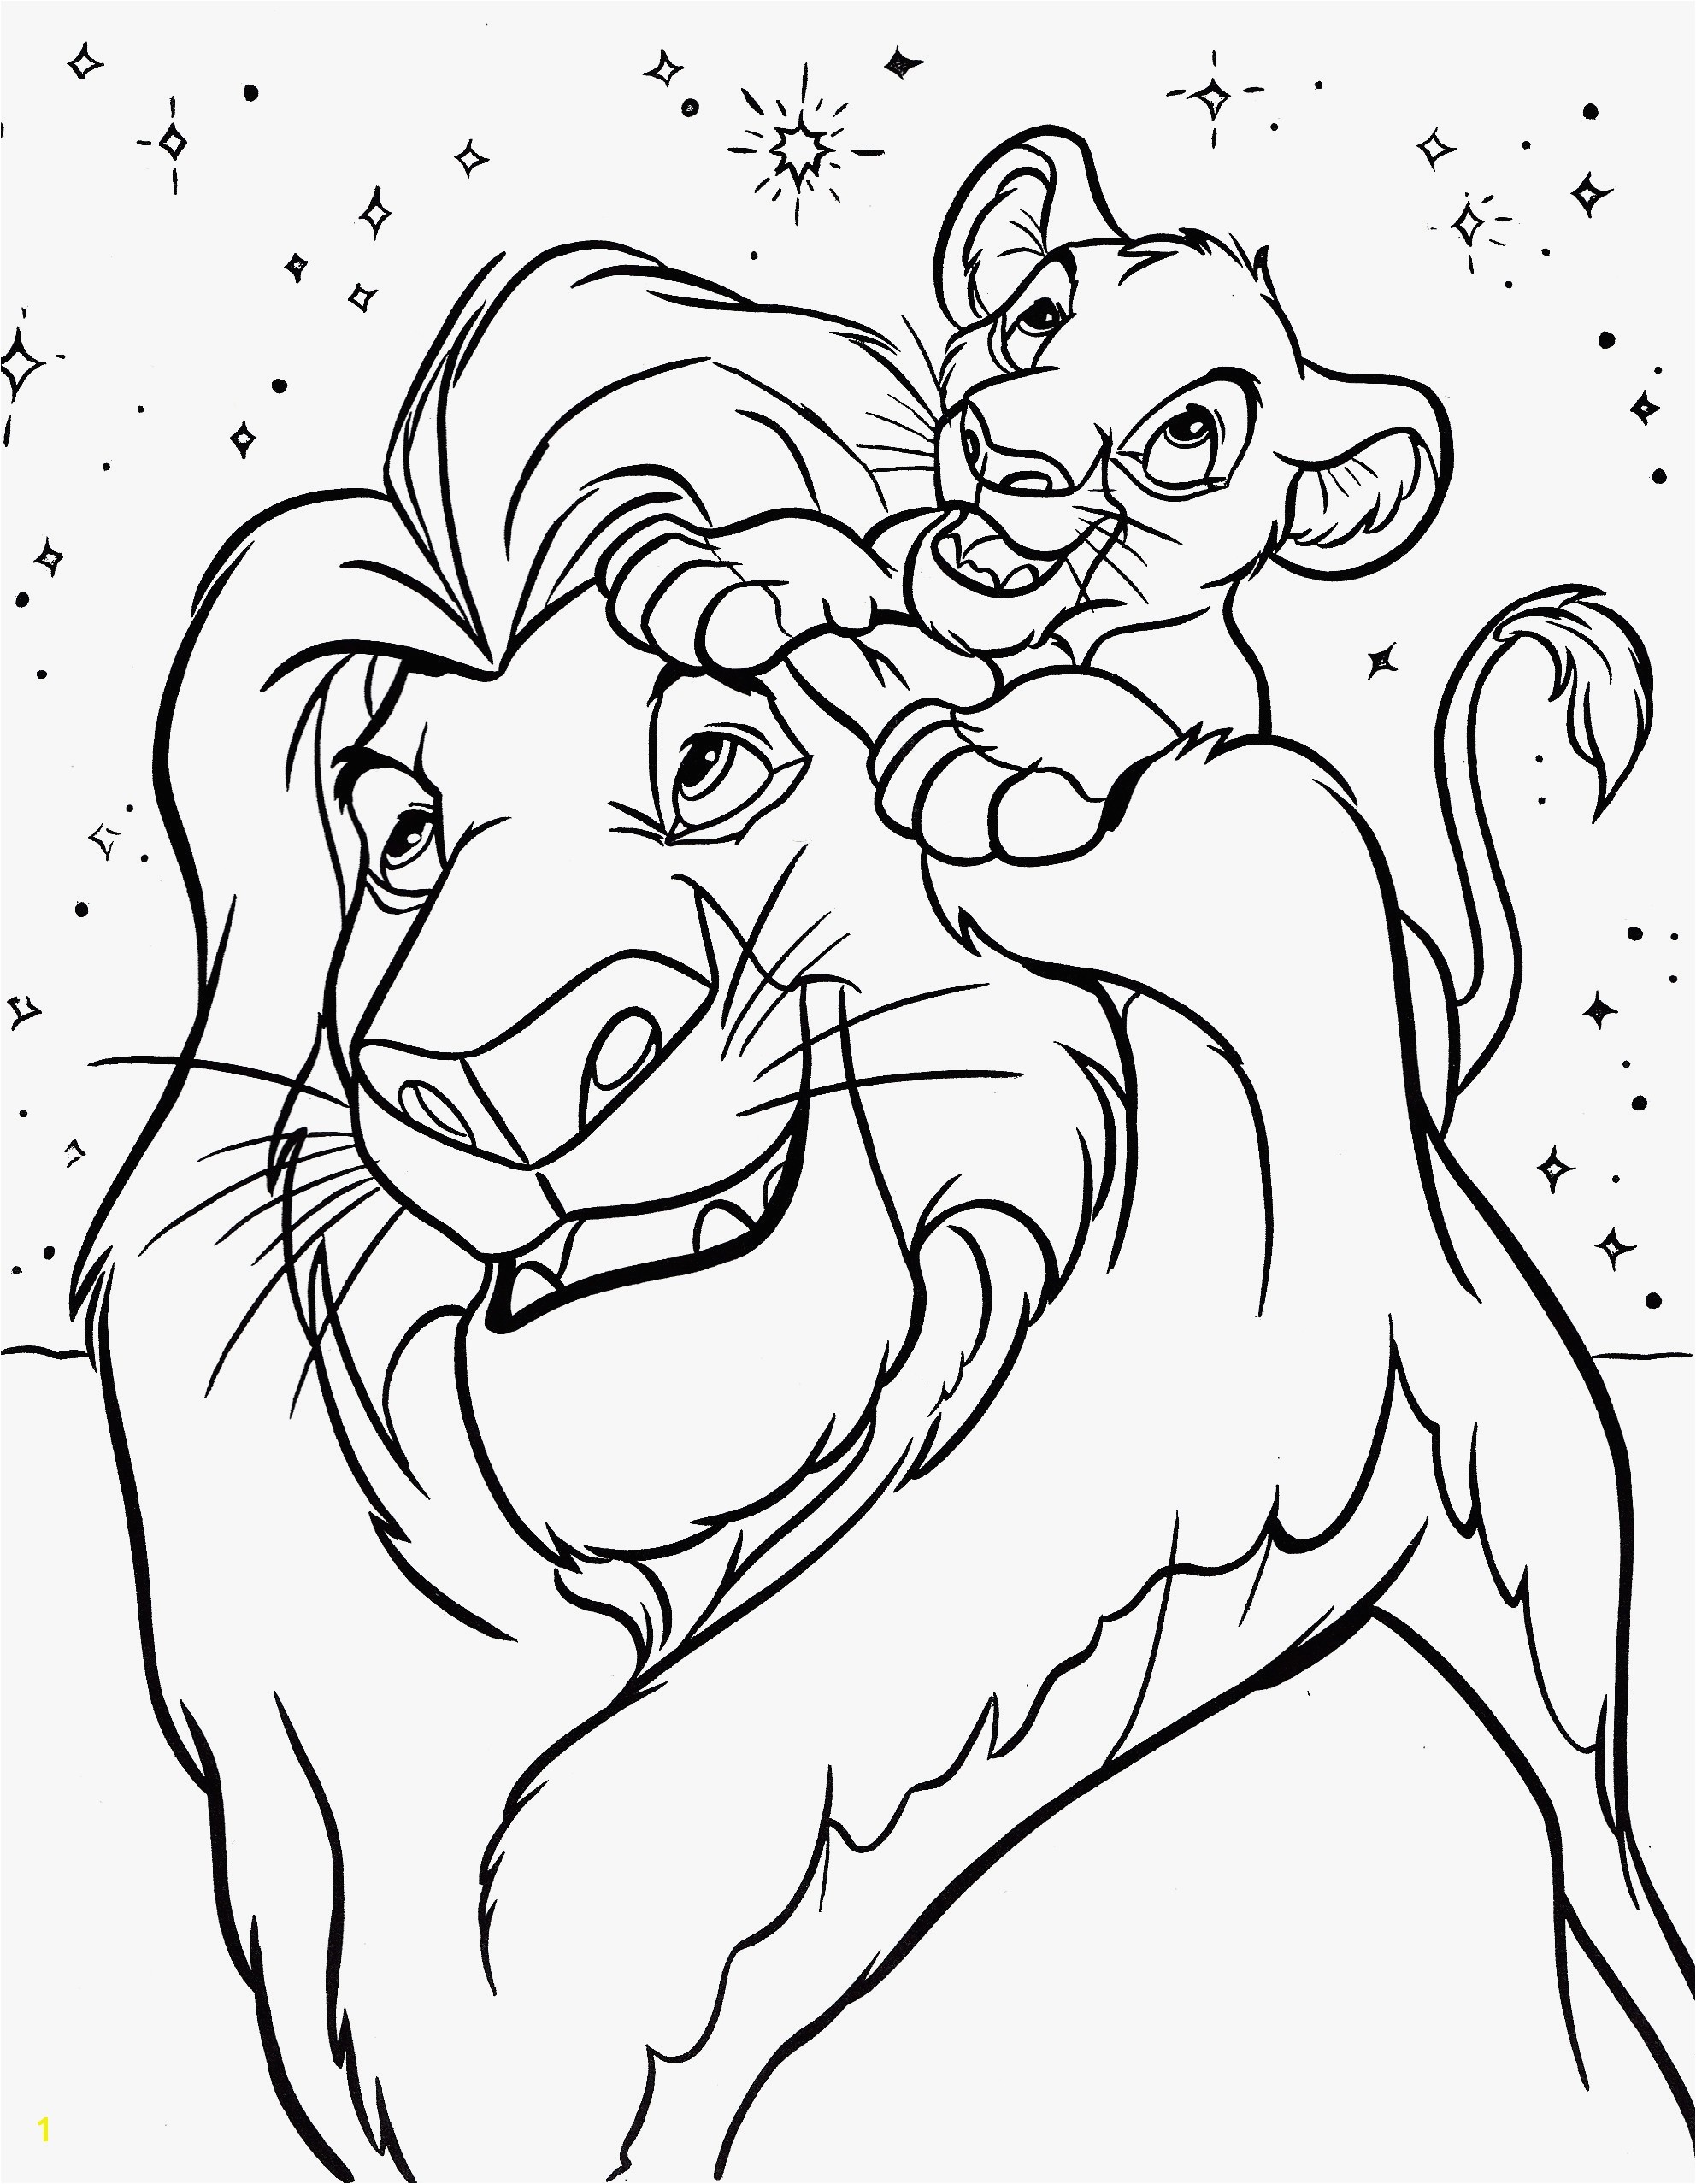 Kickball Coloring Pages 12 Awesome Coloring Pages Elsa